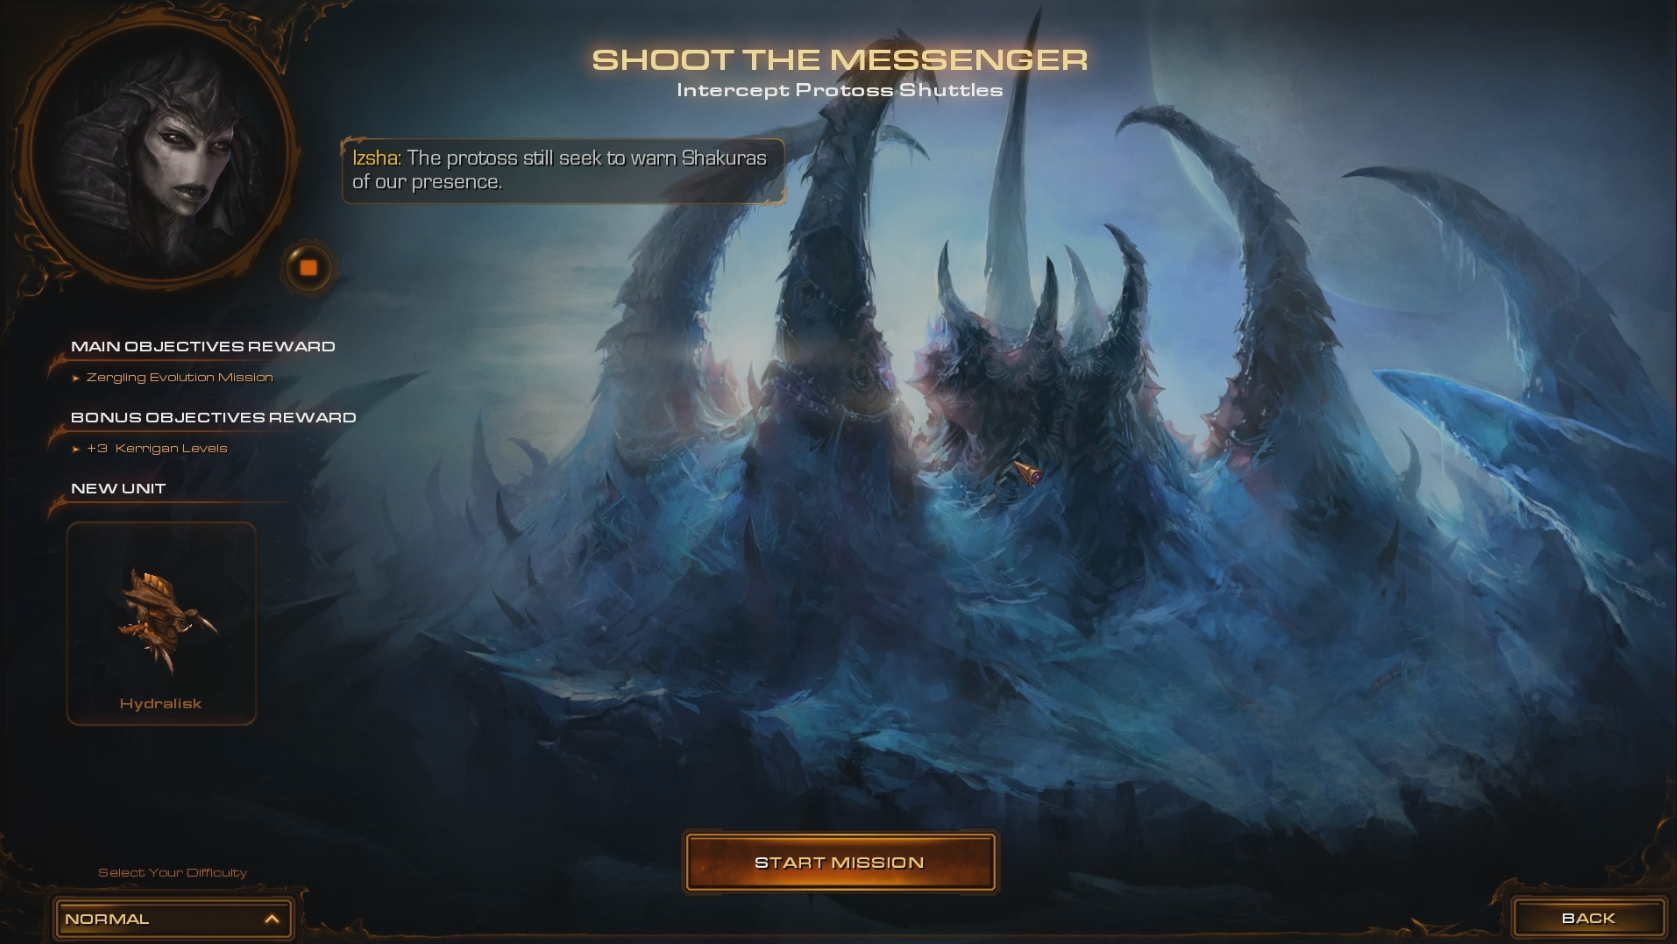 Shooting the Messenger – StarCraft II: Heart of the Swarm Single Player Transcript